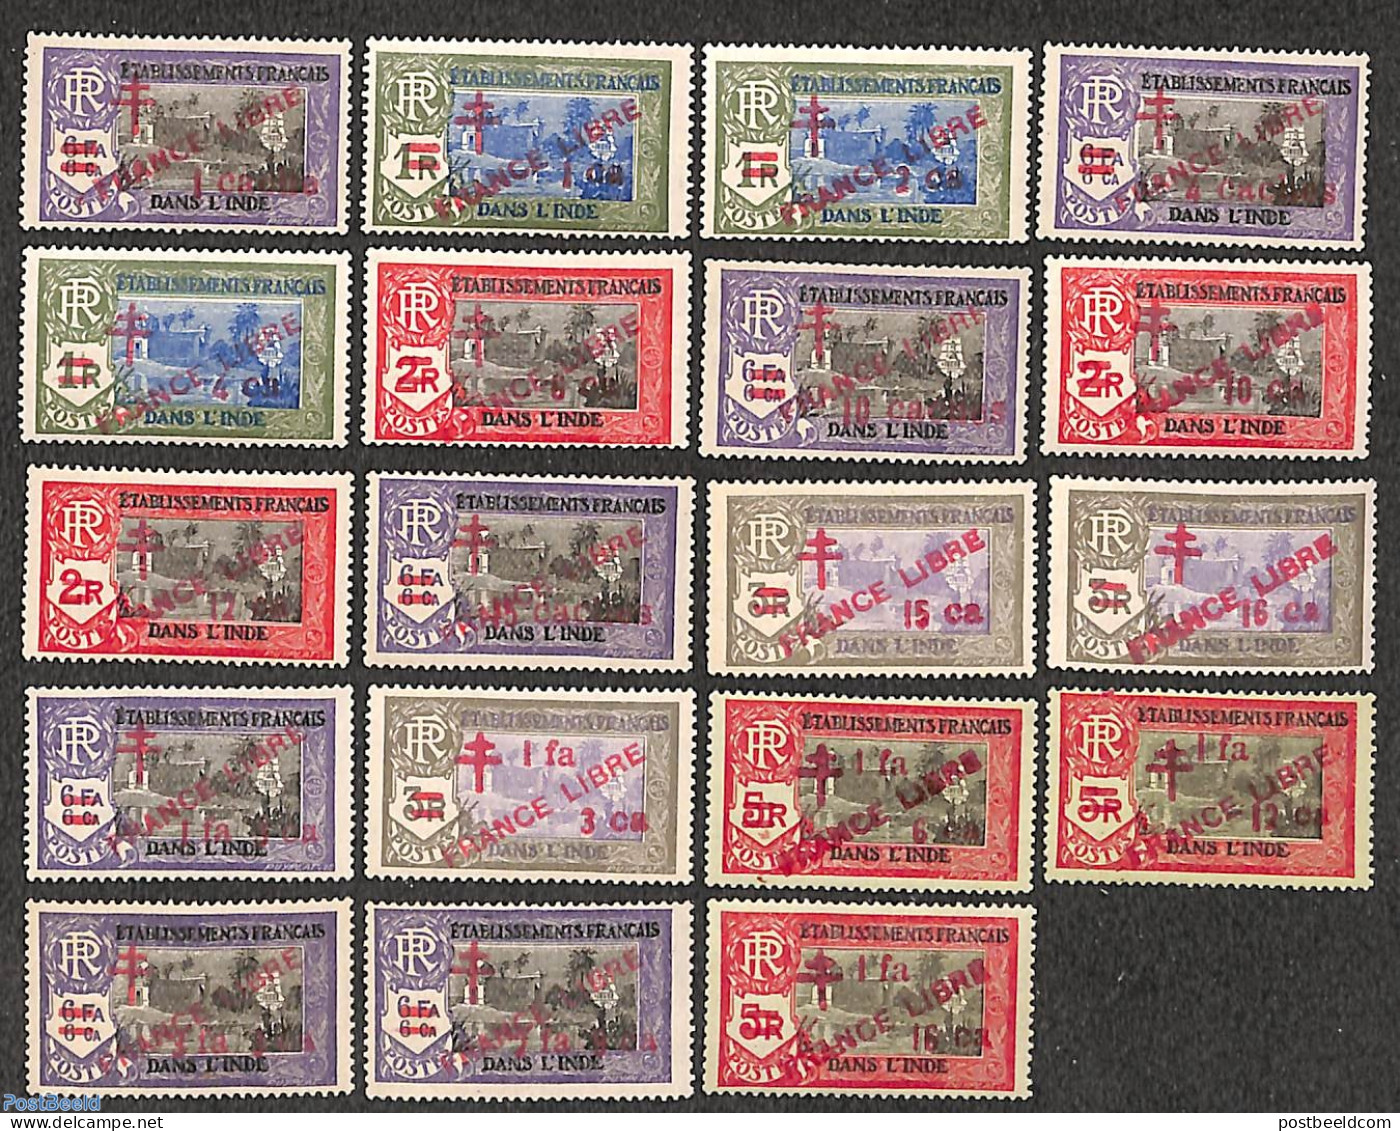 French India 1942 France Libre Overprints 19v, Unused (hinged) - Nuovi